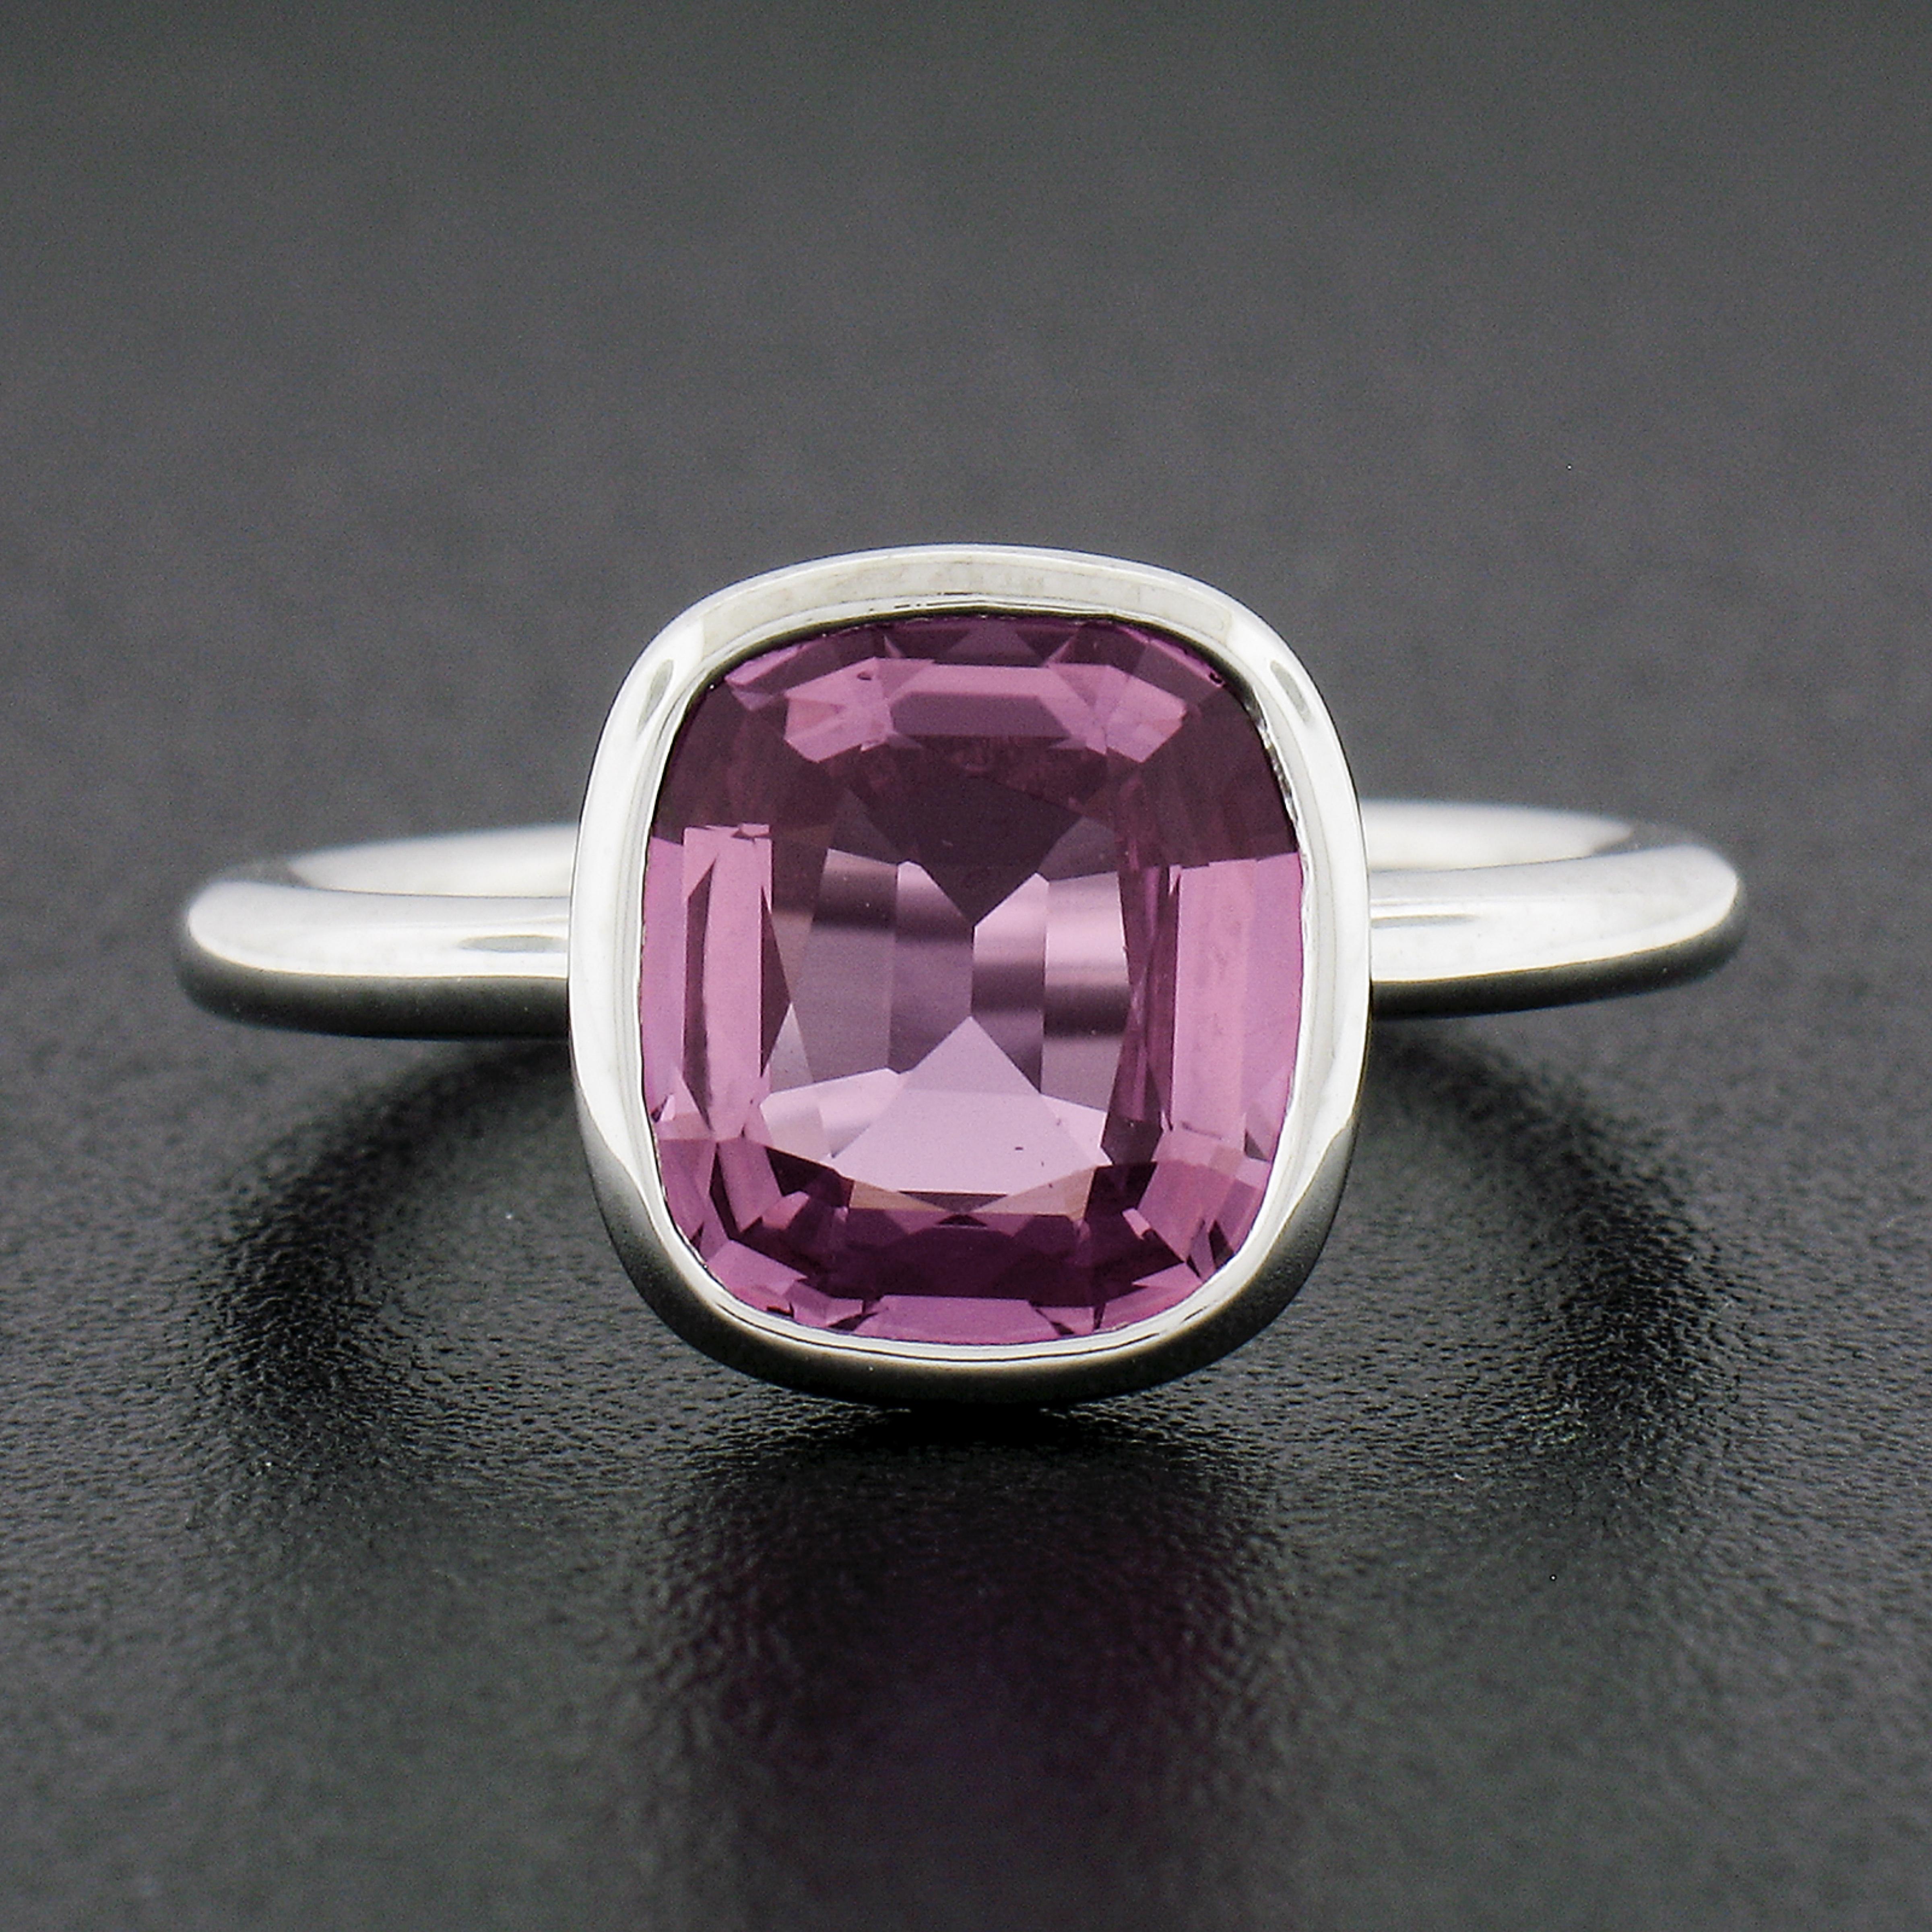 --Stone(s):--
(1) Natural Genuine Sapphire - Cushion Brilliant Cut - Bezel Set - Purple - Pink Color - Heated - 2.89ct (exact - certified)
** See Certification Details Below for Complete Info **
Total Carat Weight:	2.89 (exact)

Material: Solid